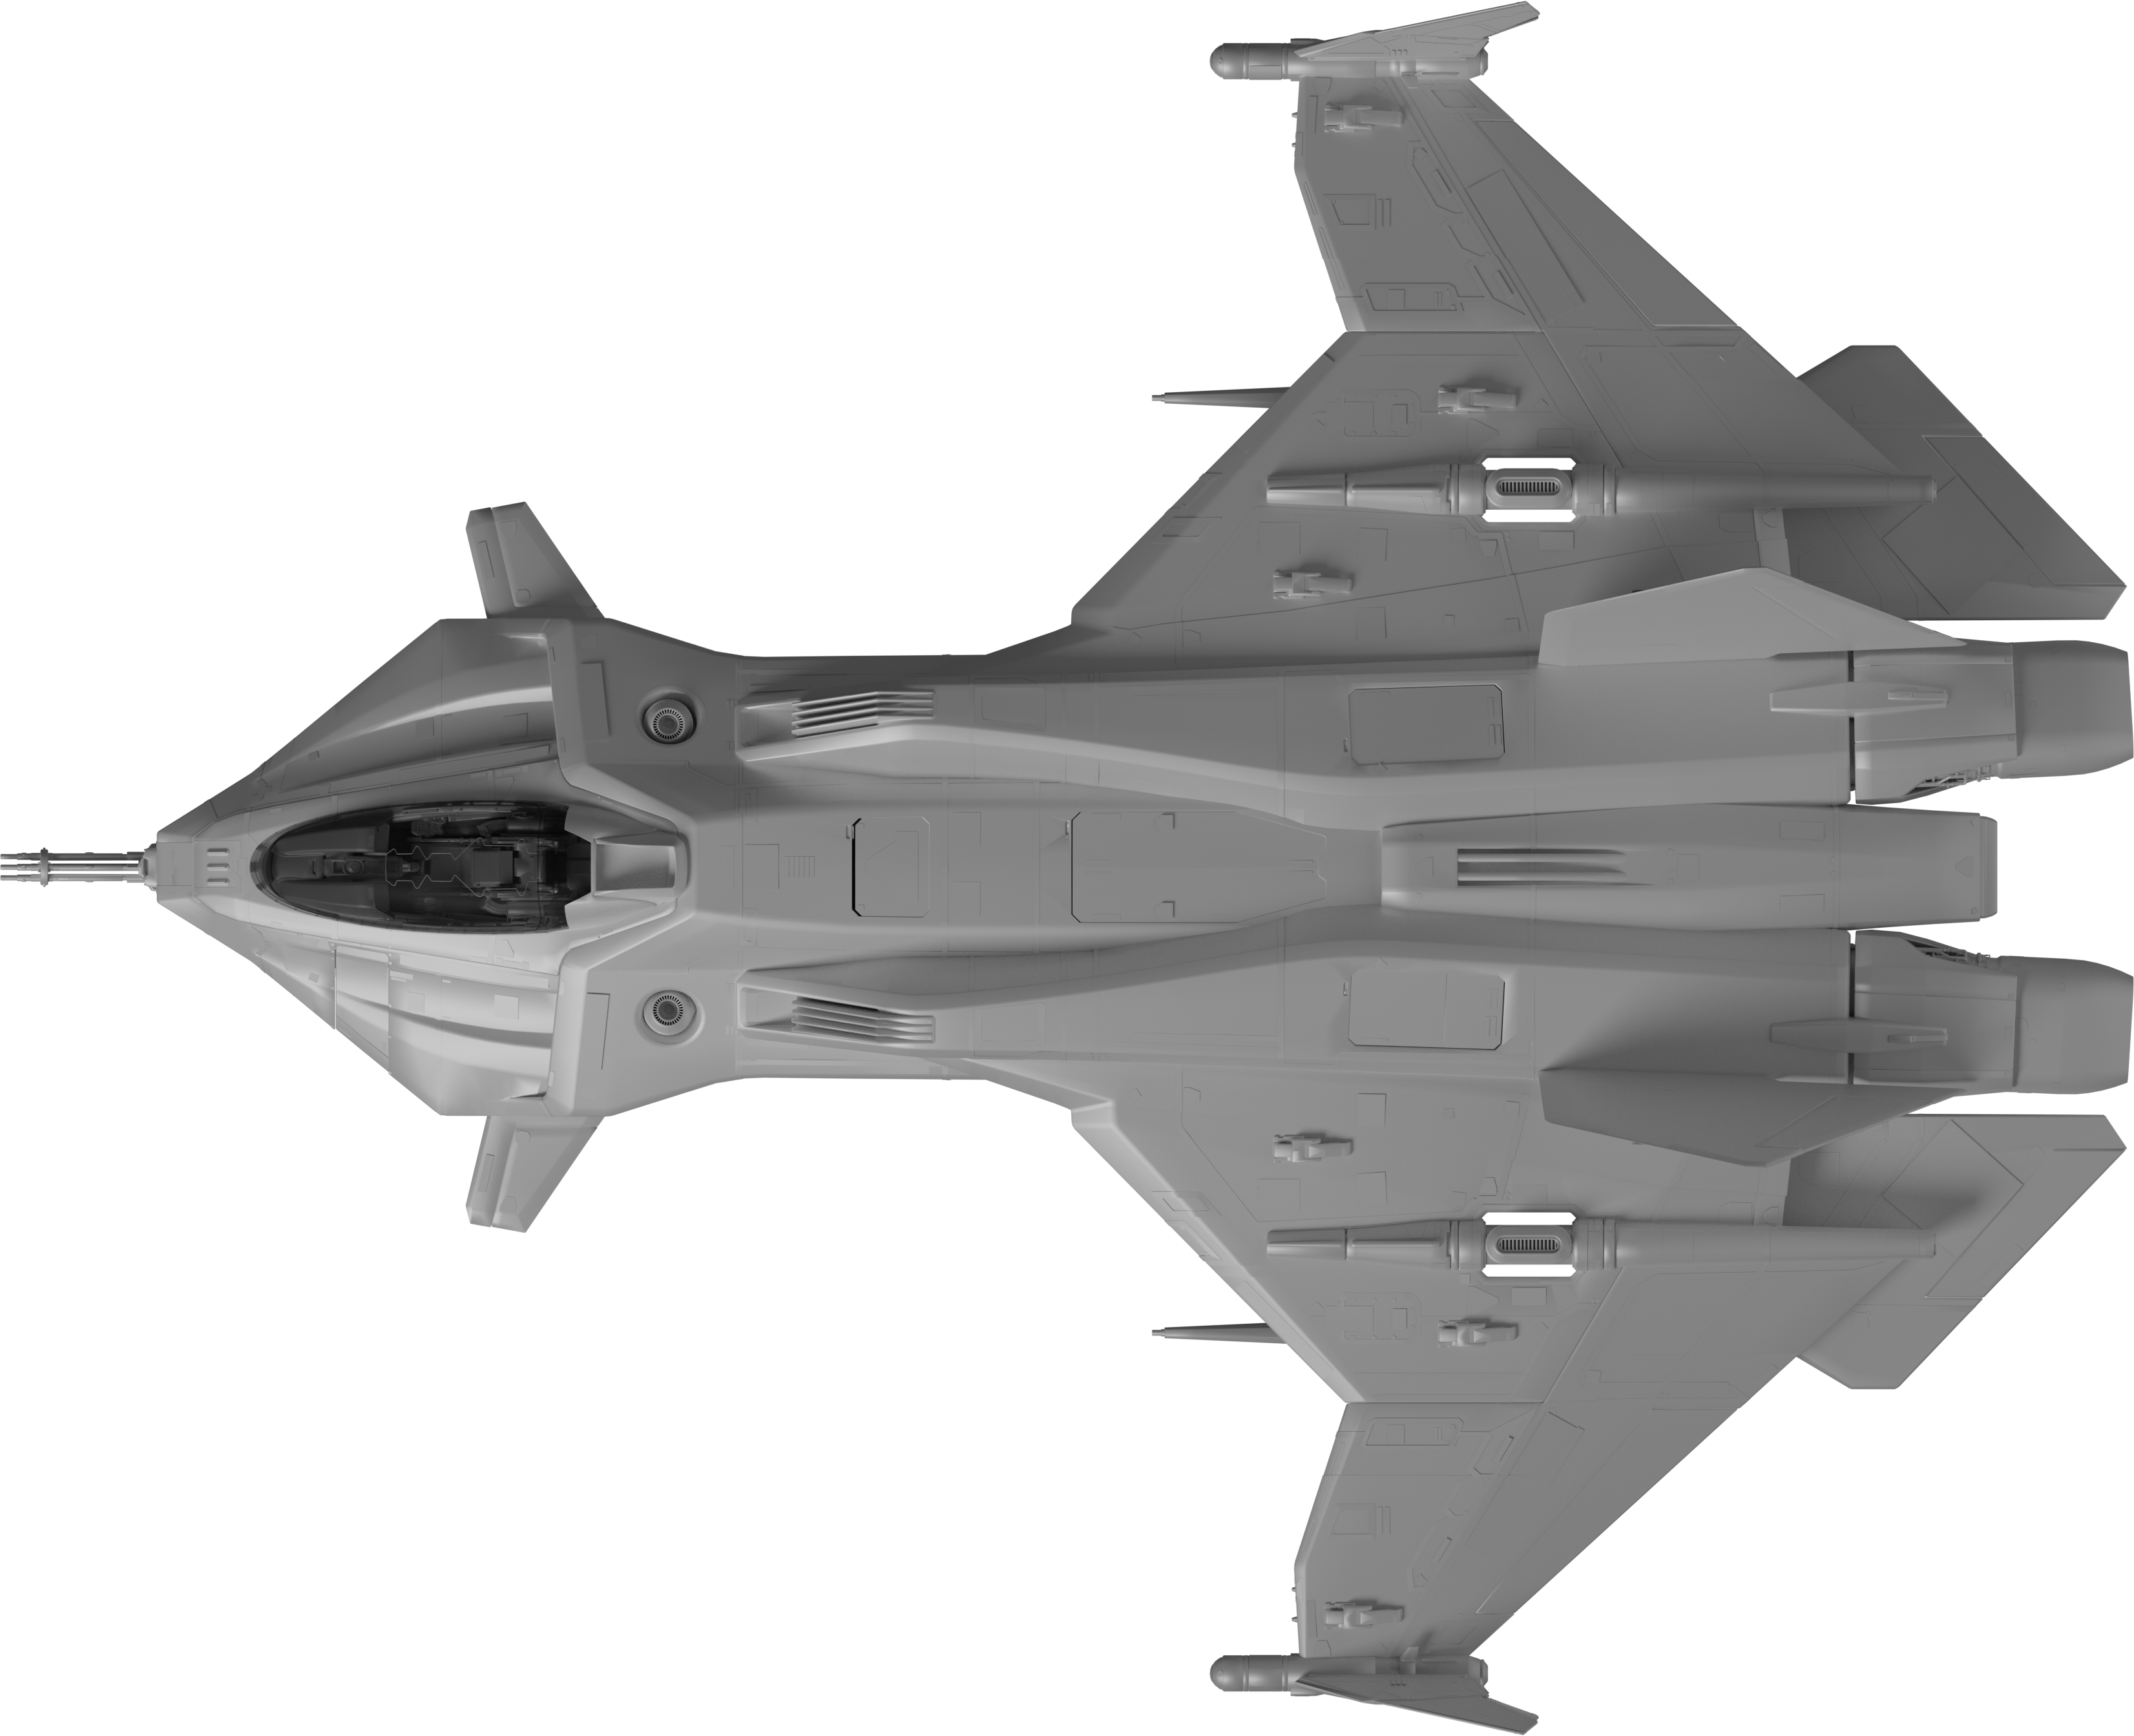 Odyssey now on Fleetview! Did a quick test what it could fit. Gladius +  Pisces viable and maybe one snub more if you get creative : r/starcitizen